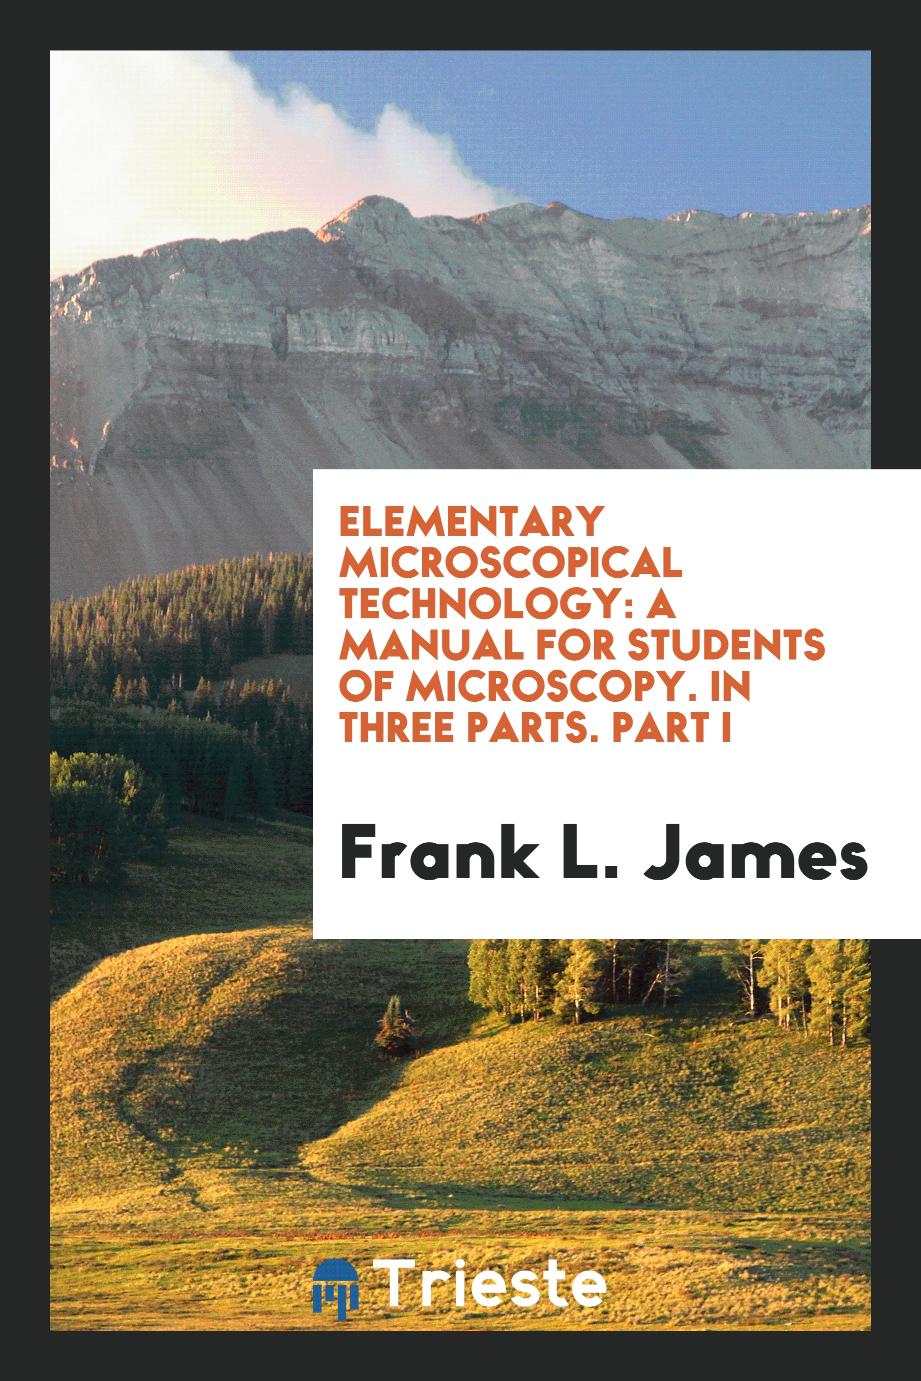 Elementary Microscopical Technology: A Manual for Students of Microscopy. In Three Parts. Part I